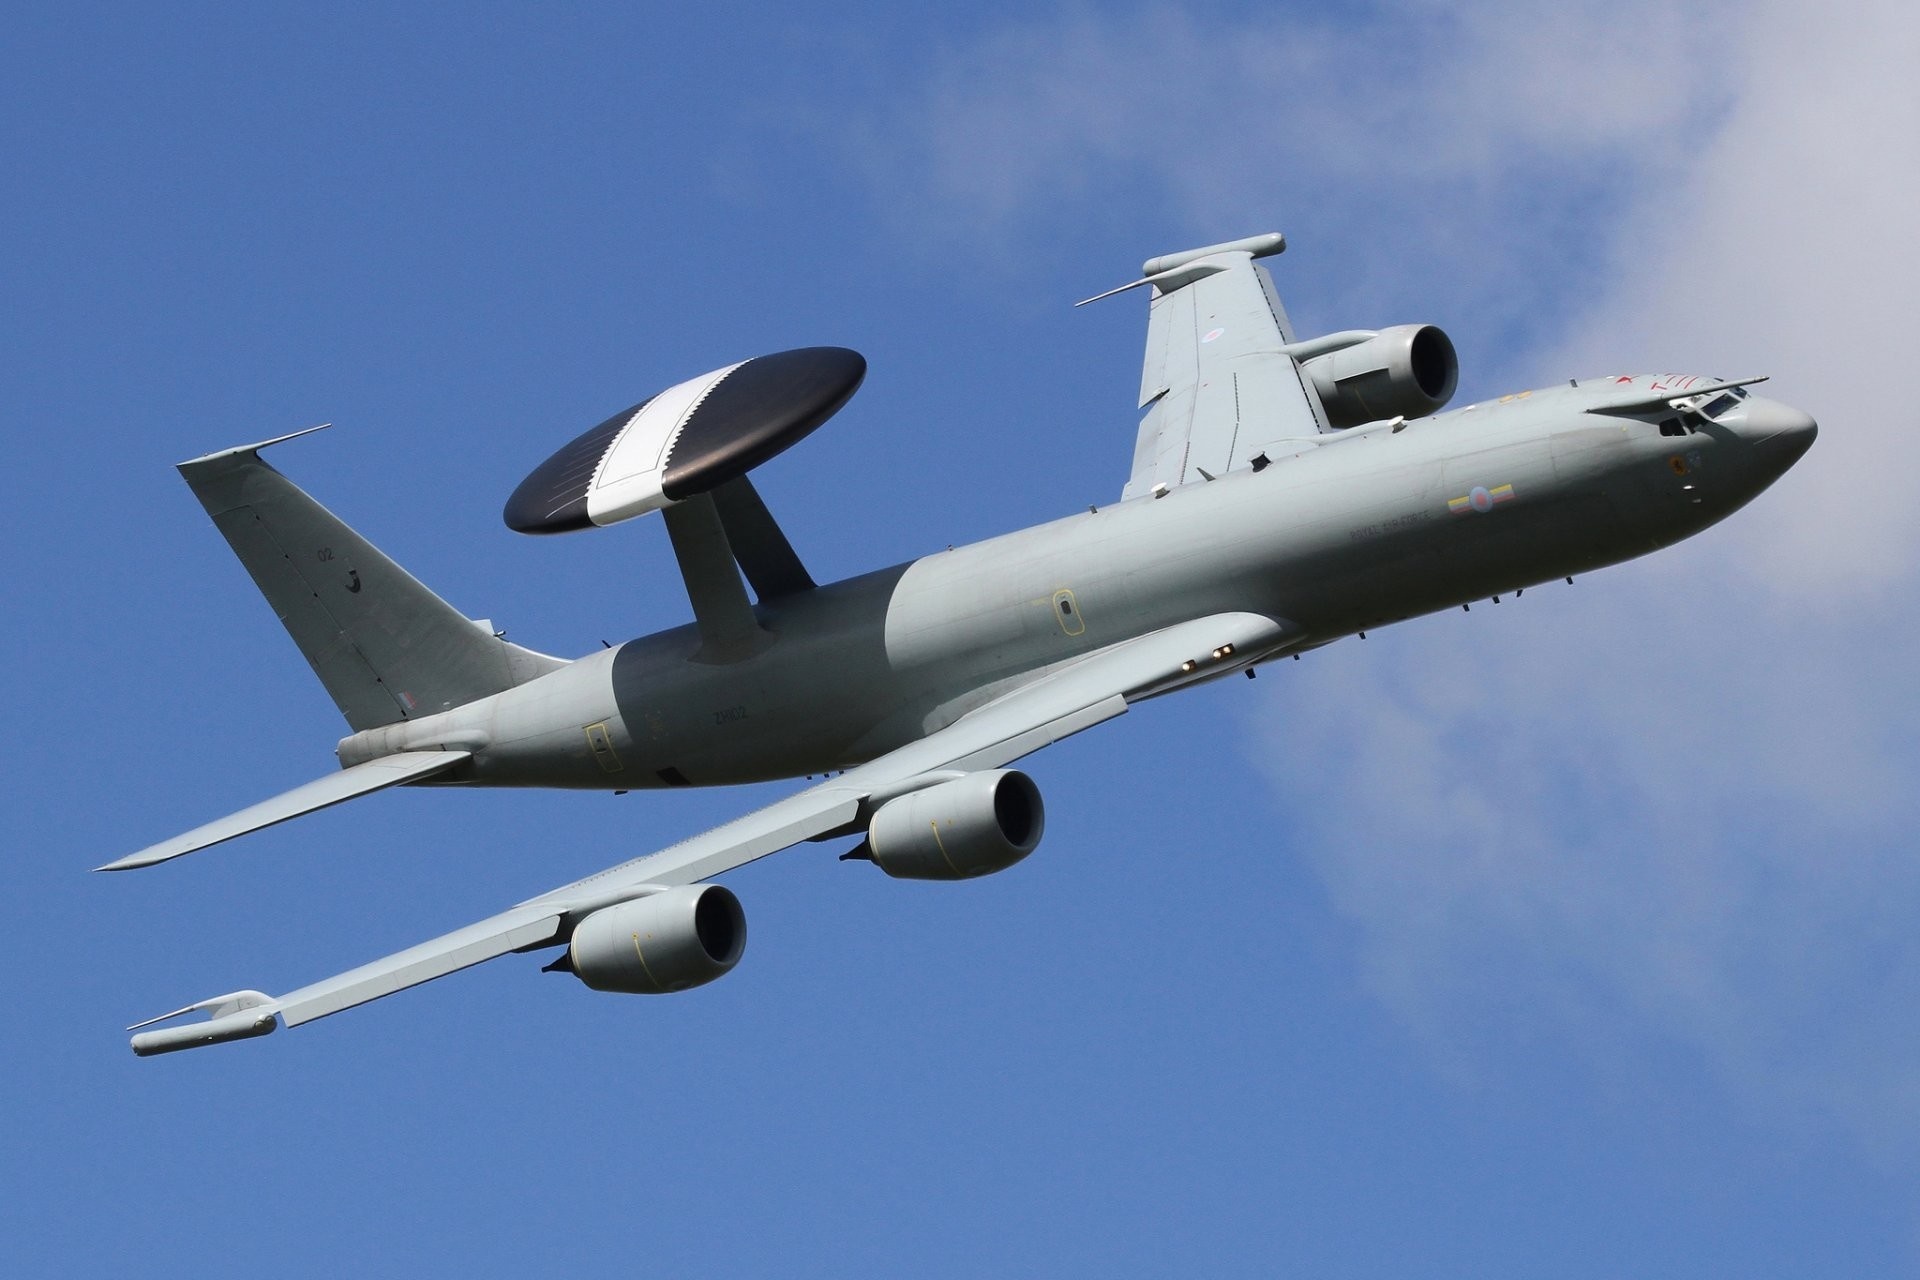 Boeing E-3, Sentry wallpapers, 68 background pictures, 1920x1280 HD Desktop